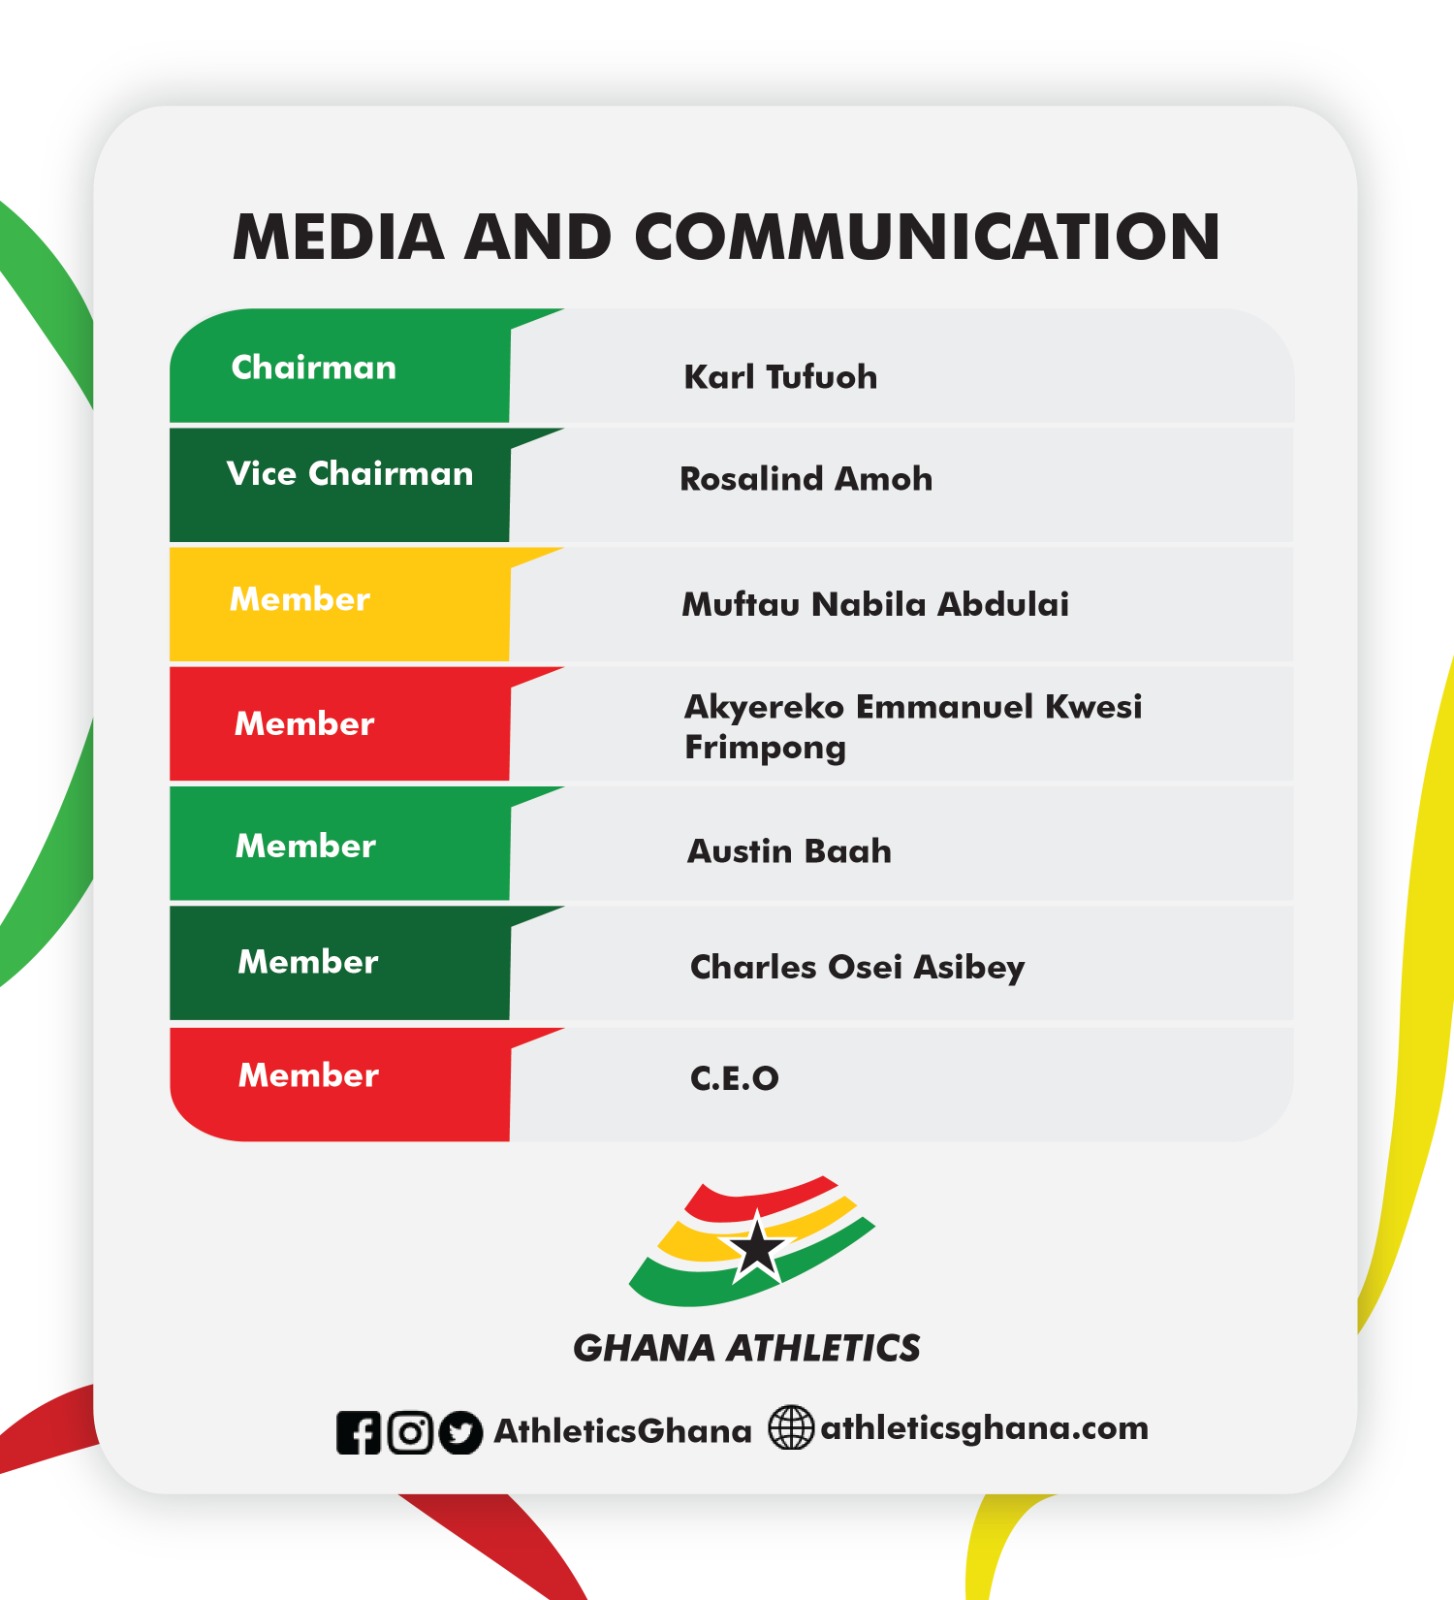 Media and Communications Committee of Ghana Athletics